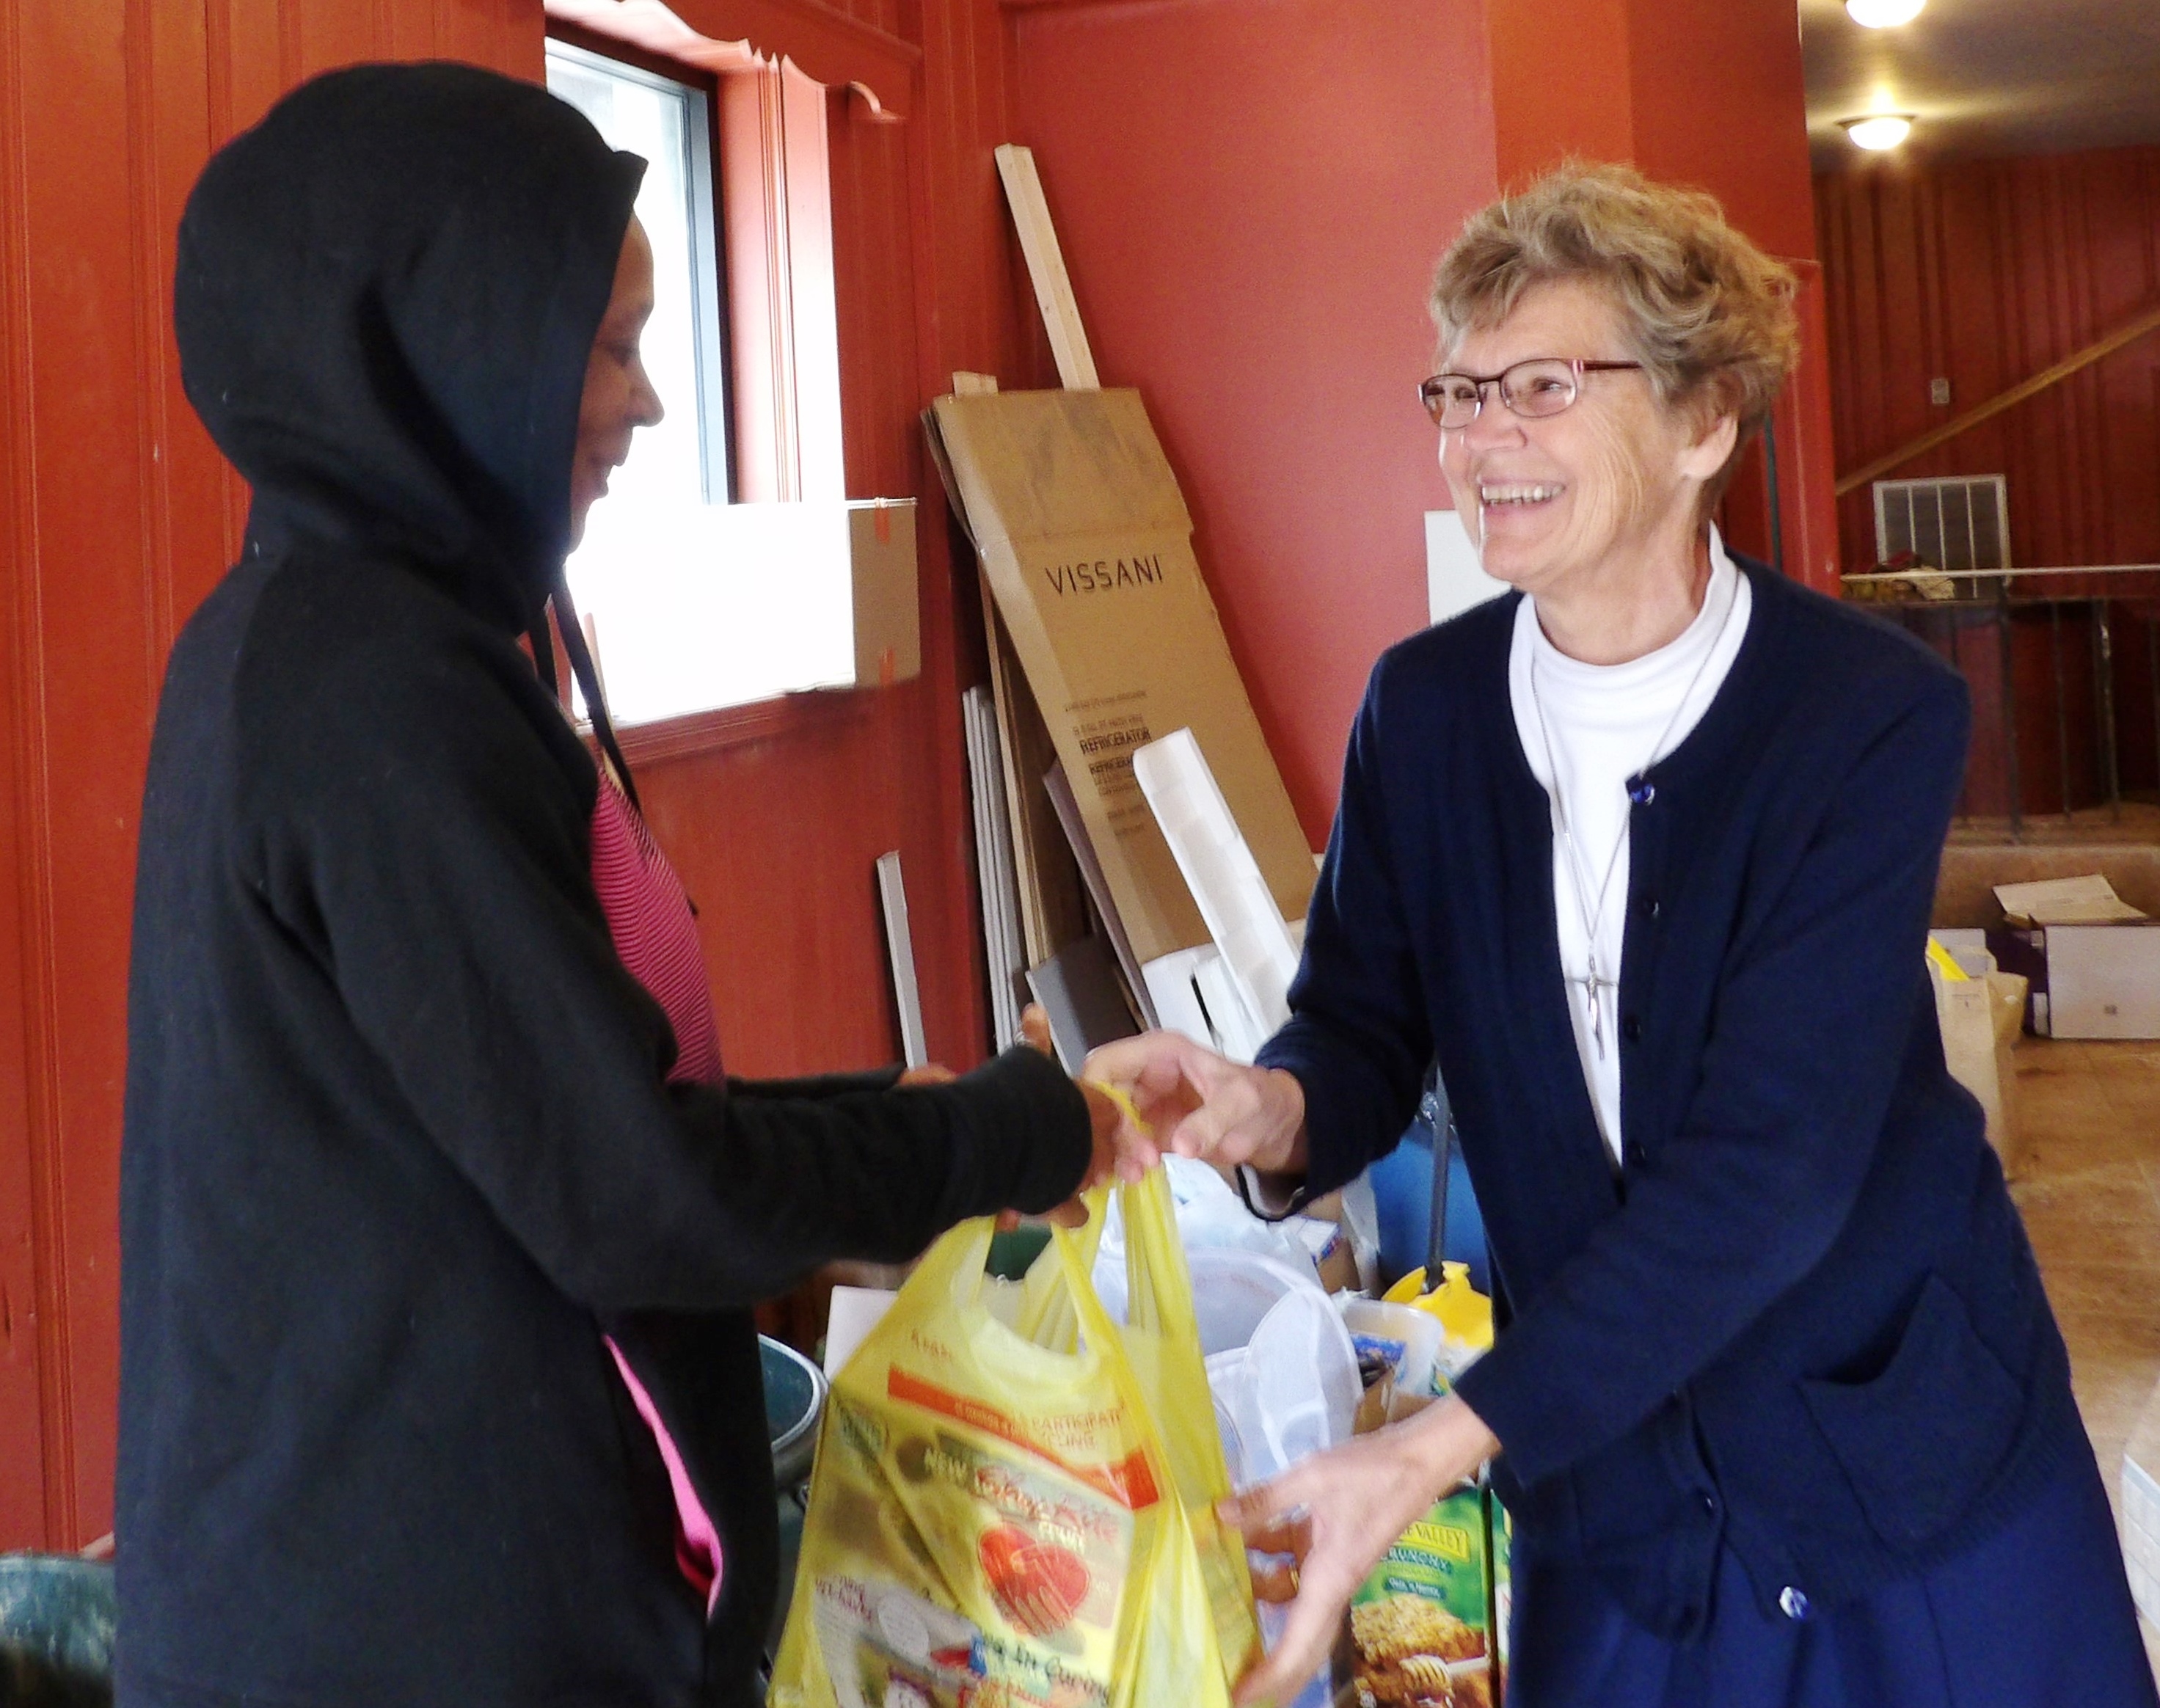 Immaculate Heart of Mary Sr. Ann Raymond Welte, right, distributes food at Mother of Mercy House in Philadelphia in October 2015. (Courtesy of Mother of Mercy House)